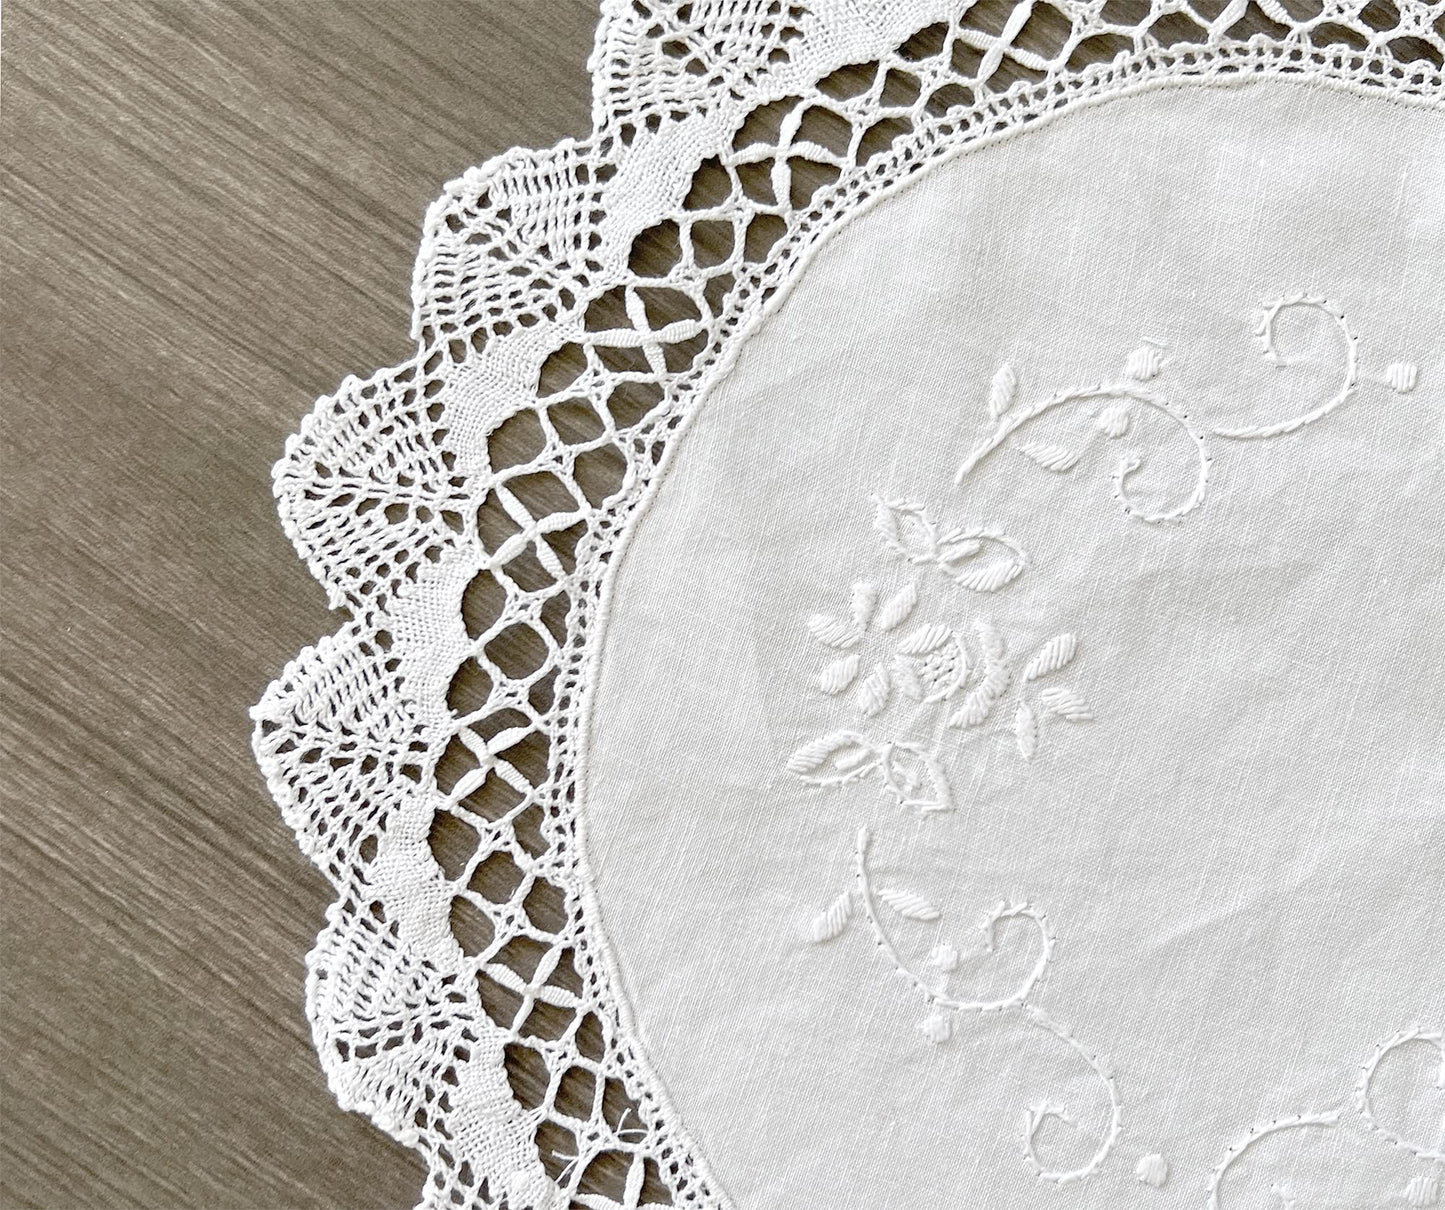 Fennco Styles Handmade Cluny Lace Embroidered Doily - Ivory Traycloth Doily for Home Décor, Banquets, Holidays, Weddings and Special Occasions